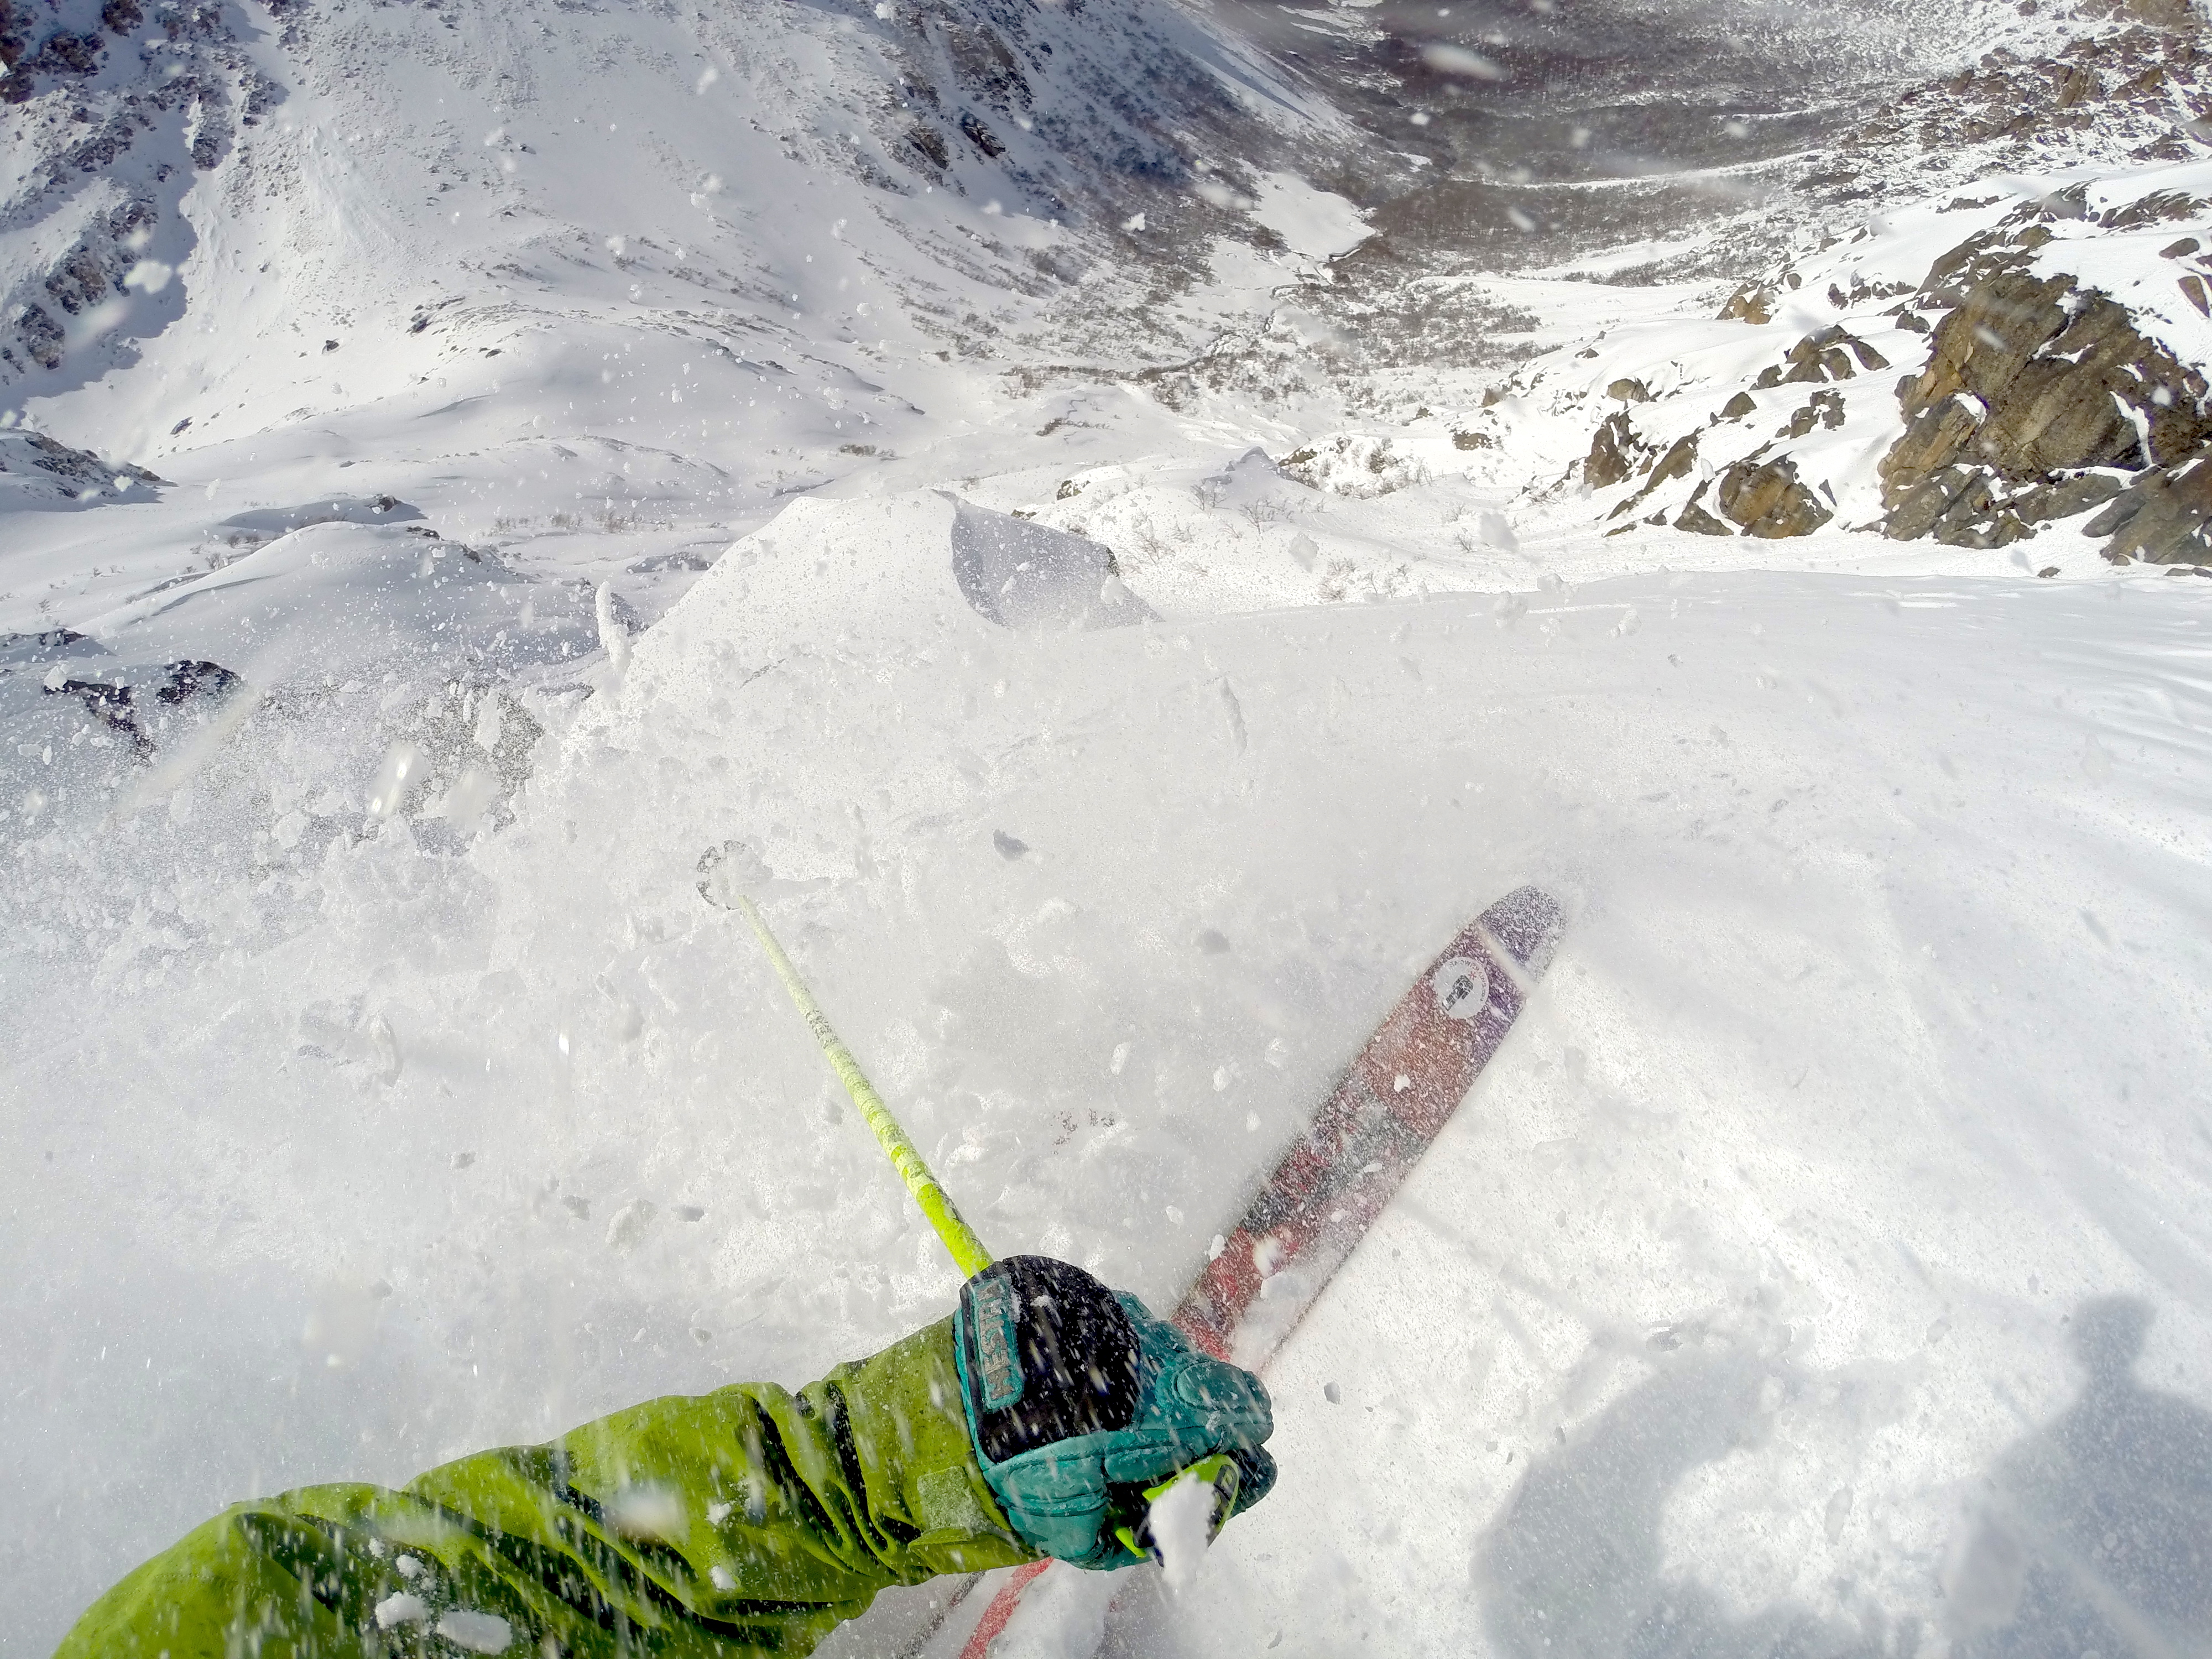 Skiing spines near Refugio Frey in the Bariloche, Argentina backcountry in September 2014. photo: miles clark/snowbrains